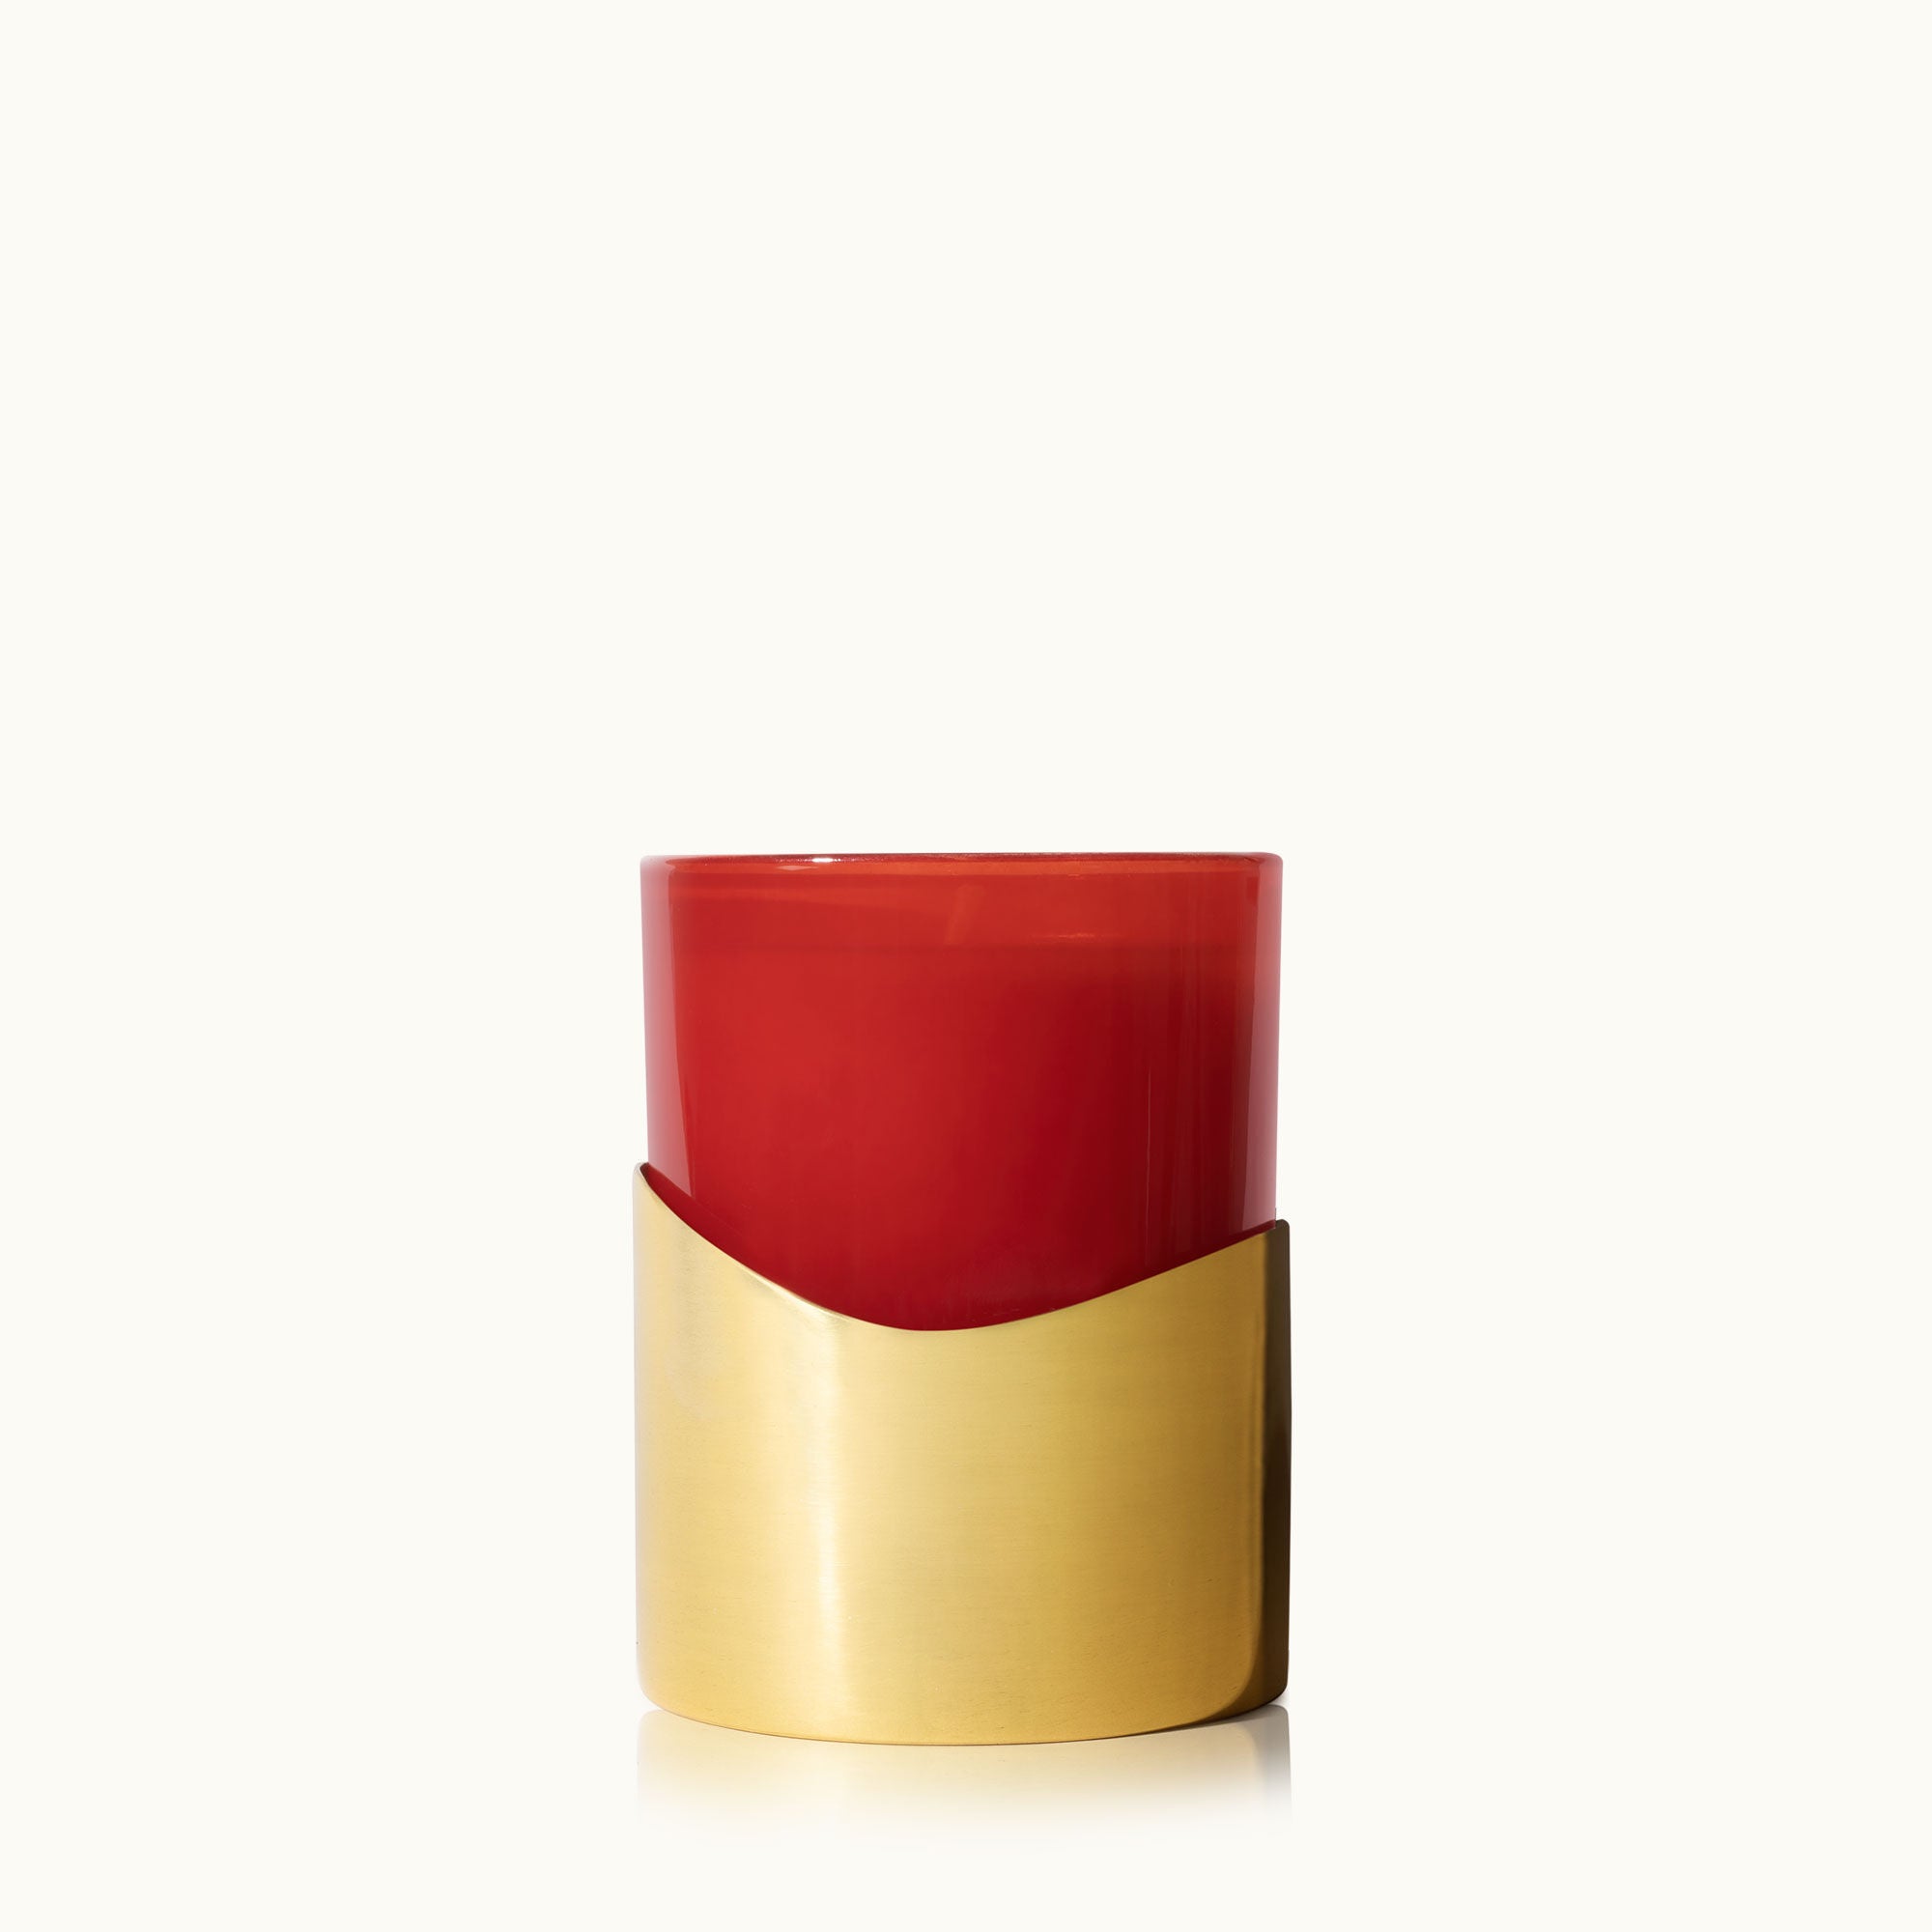 thymes-simmered-cider-harvest-red-sleeve-candle-0531750107.jpg